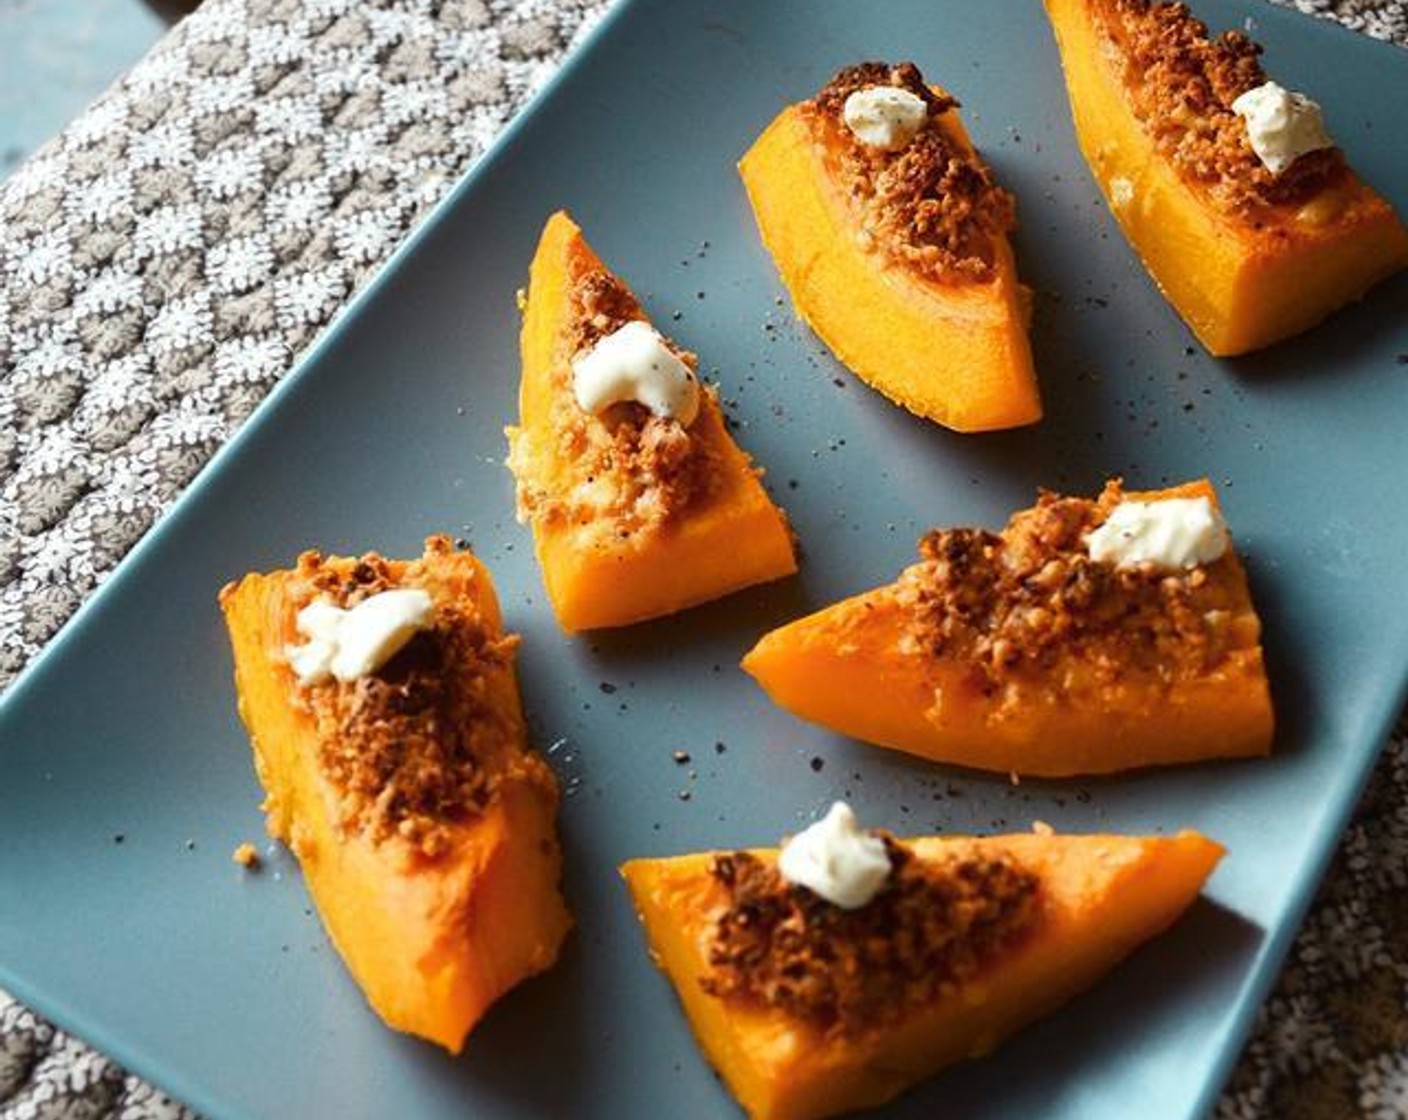 Roasted Squash with Tomato and Goat Cheese Crumb